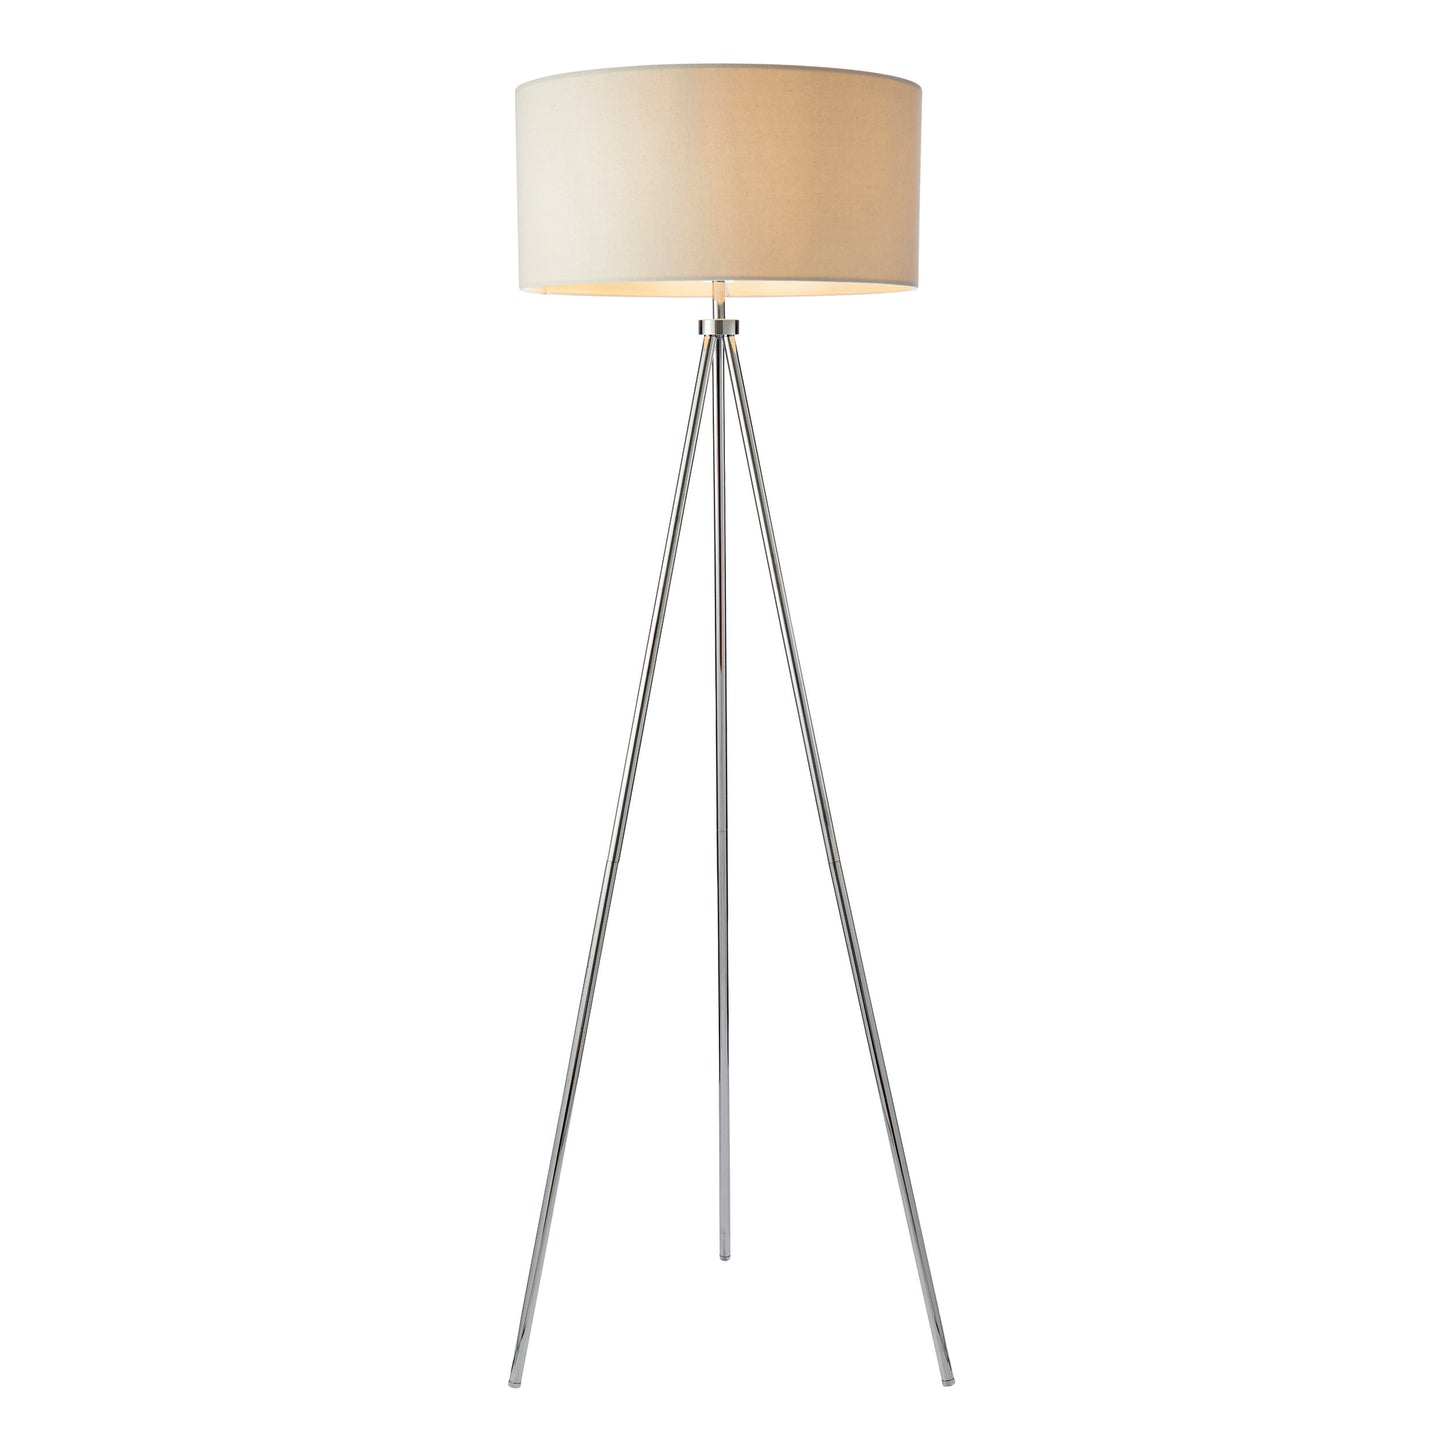 A home furniture item, the Kikiathome.co.uk Tri Floor Lamp in chrome, featuring a beige shade.